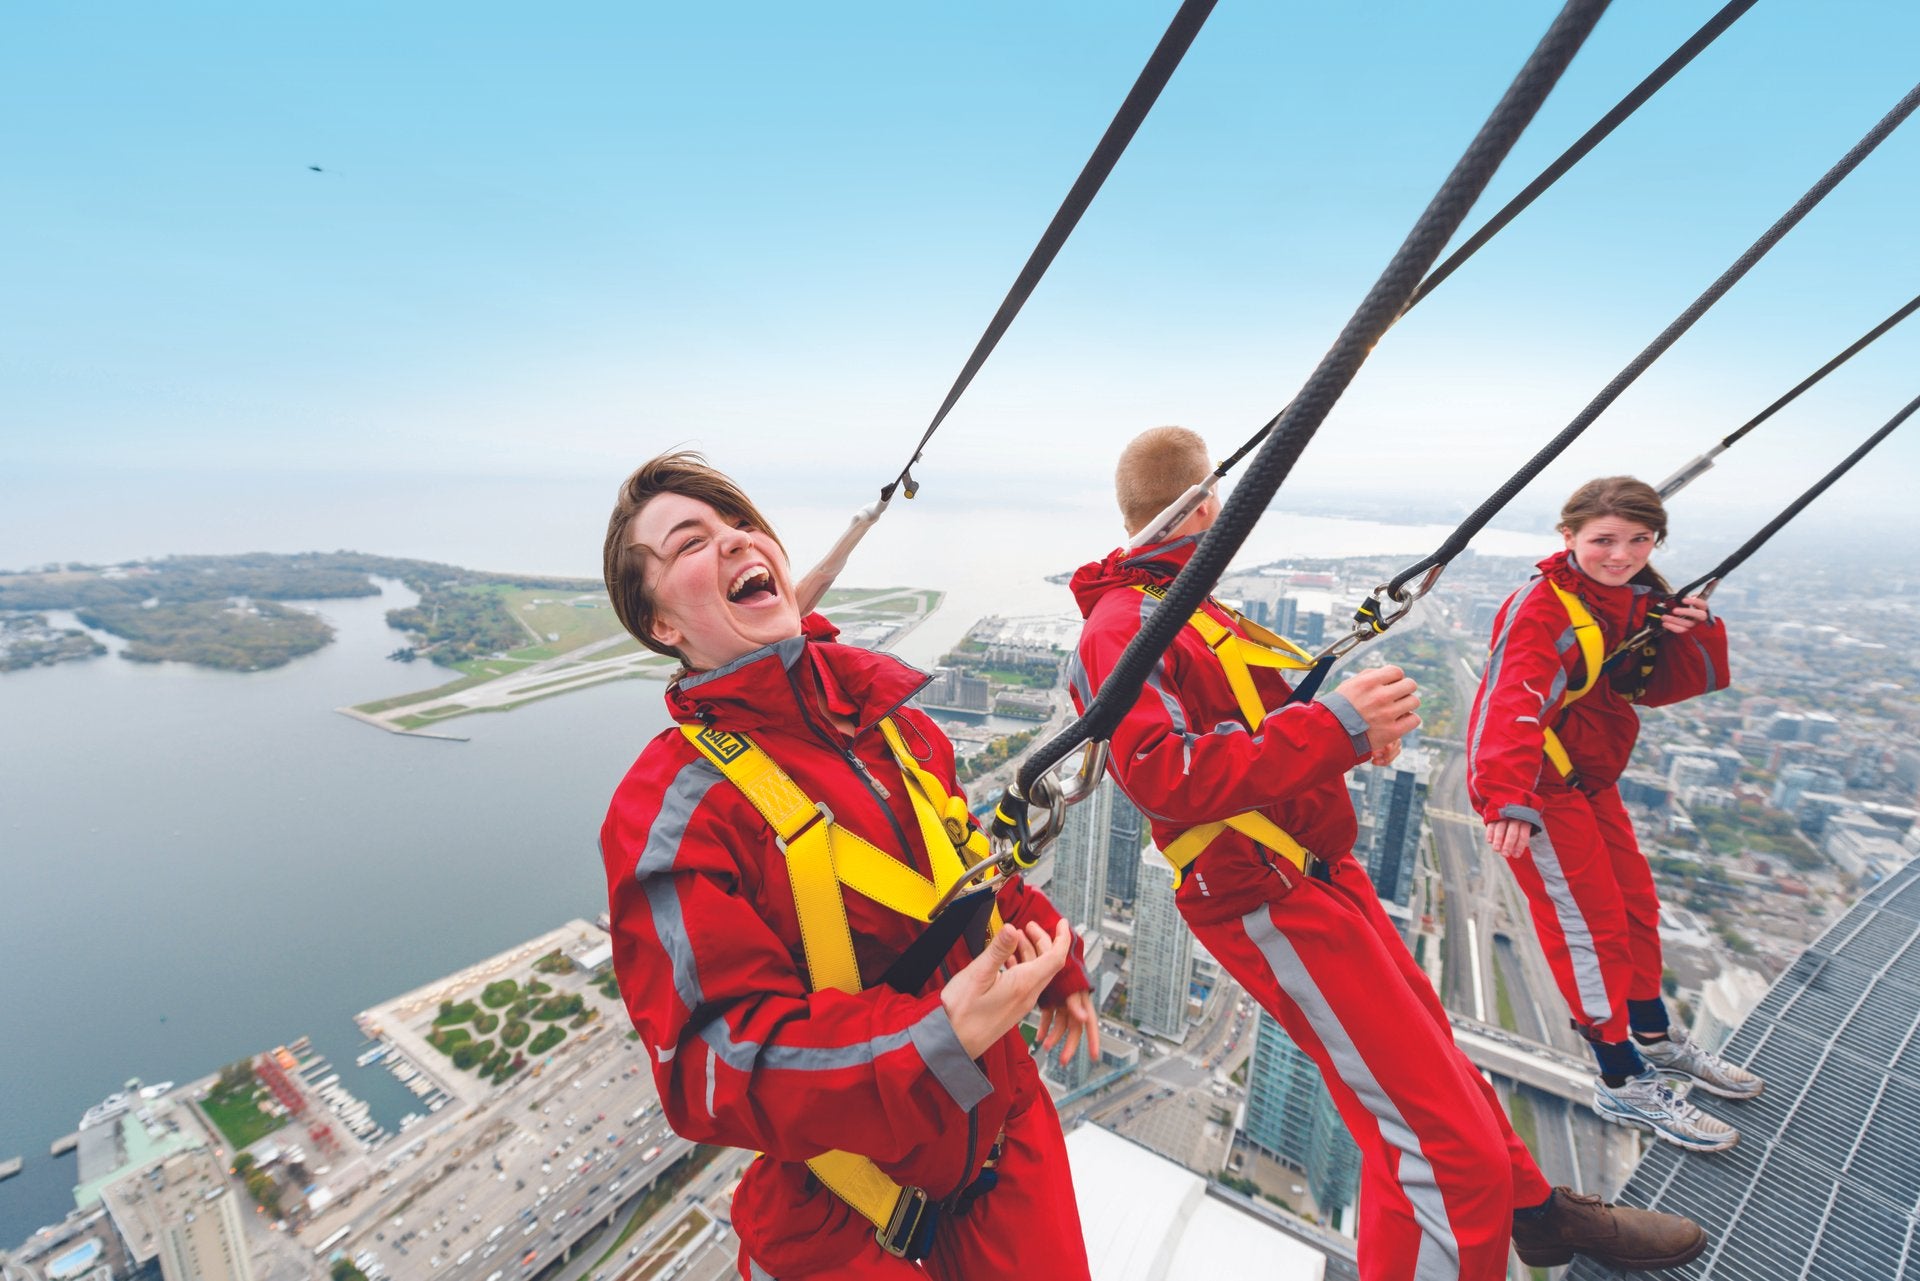 Experience the dizzying heights from the top of one of the world’s tallest freestanding structures on an Edge Walk at the CN Tower